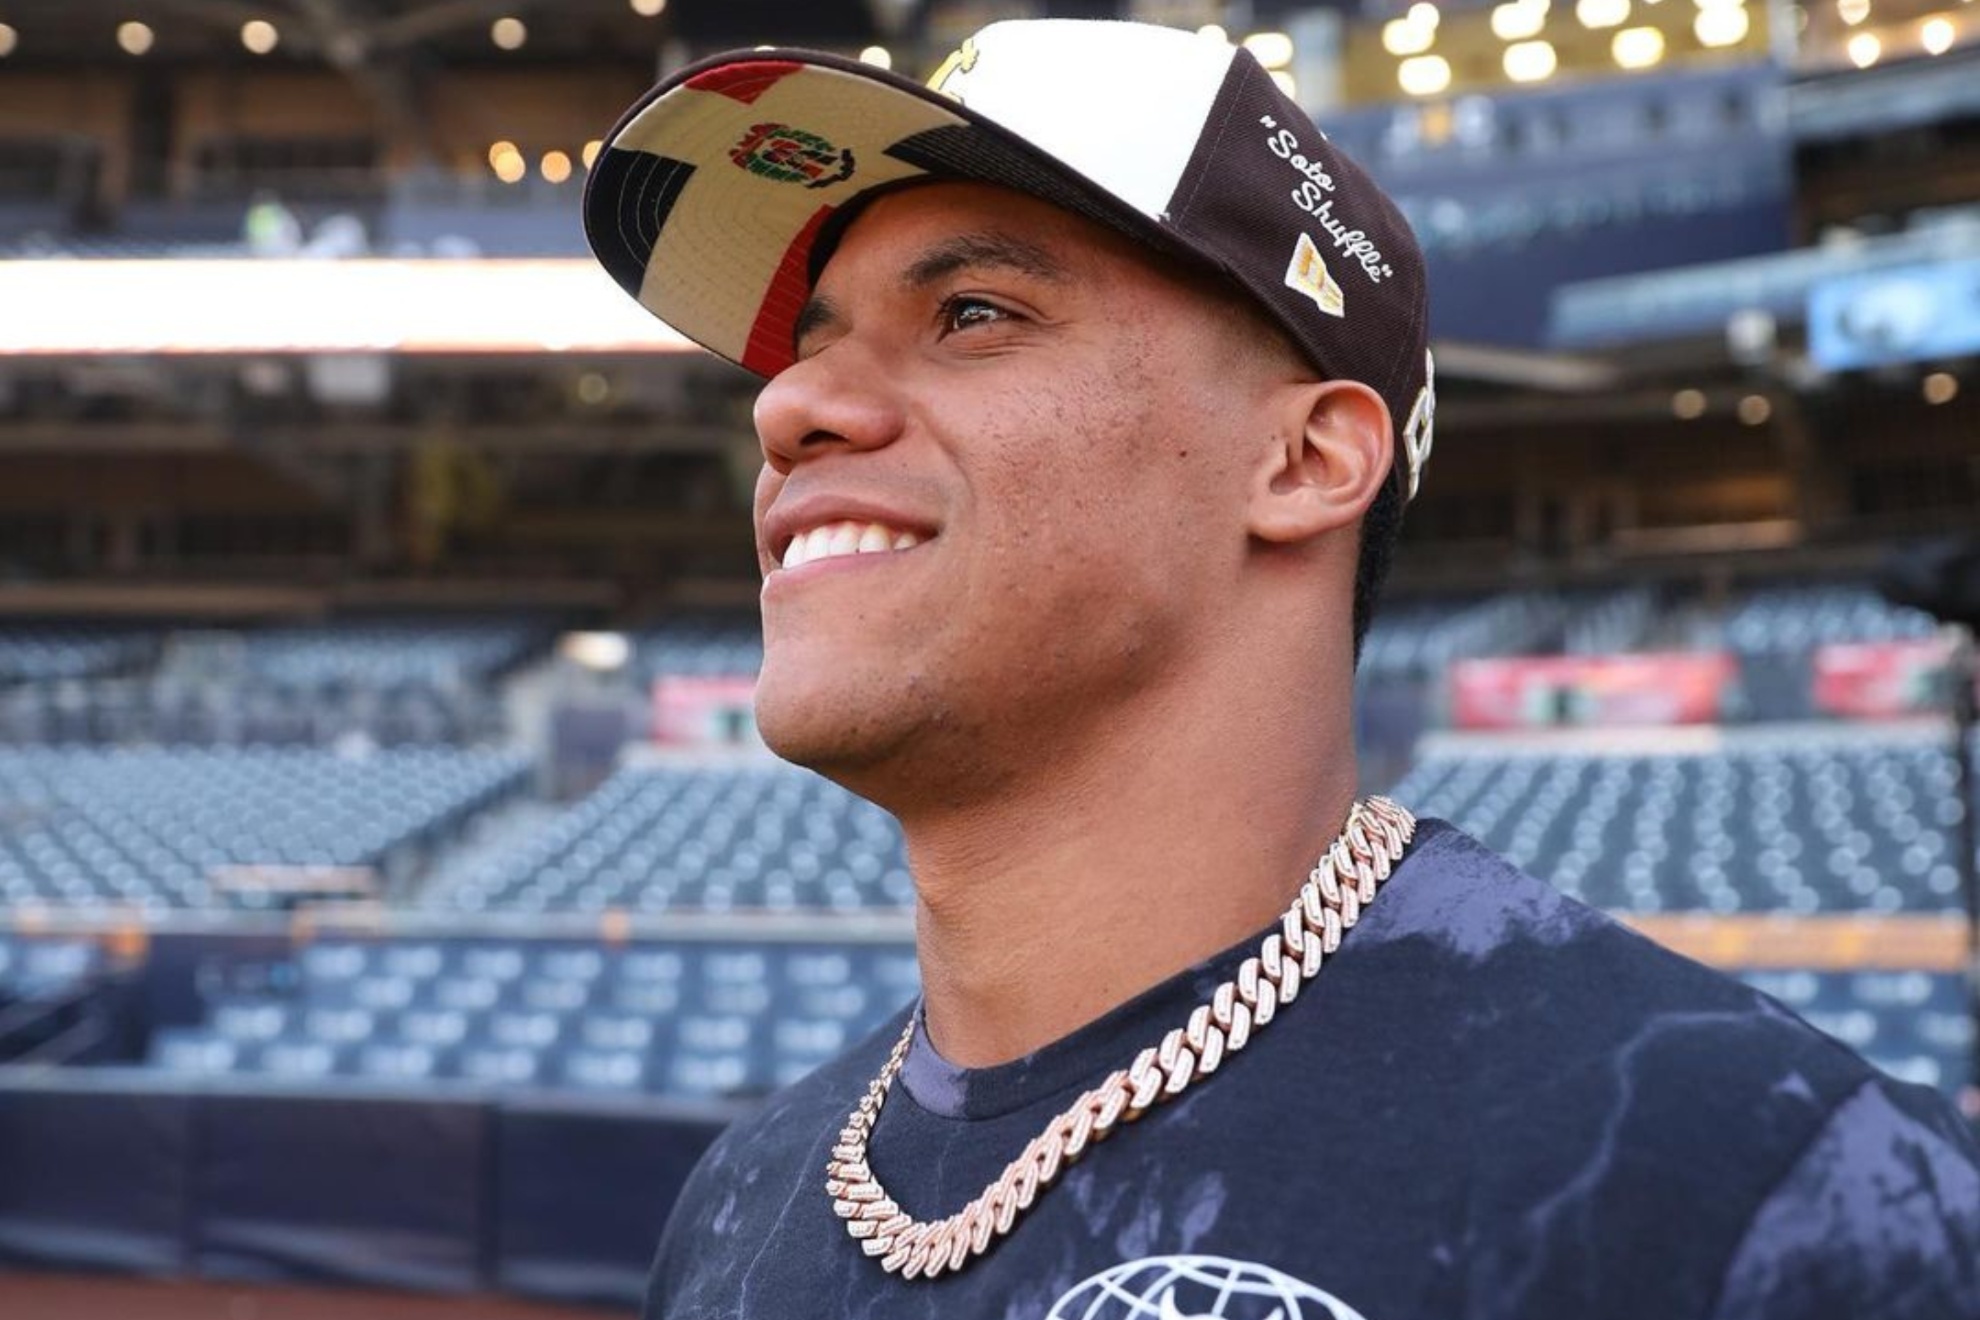 Juan Soto has agreed to a one-year contract with the New York Yankees